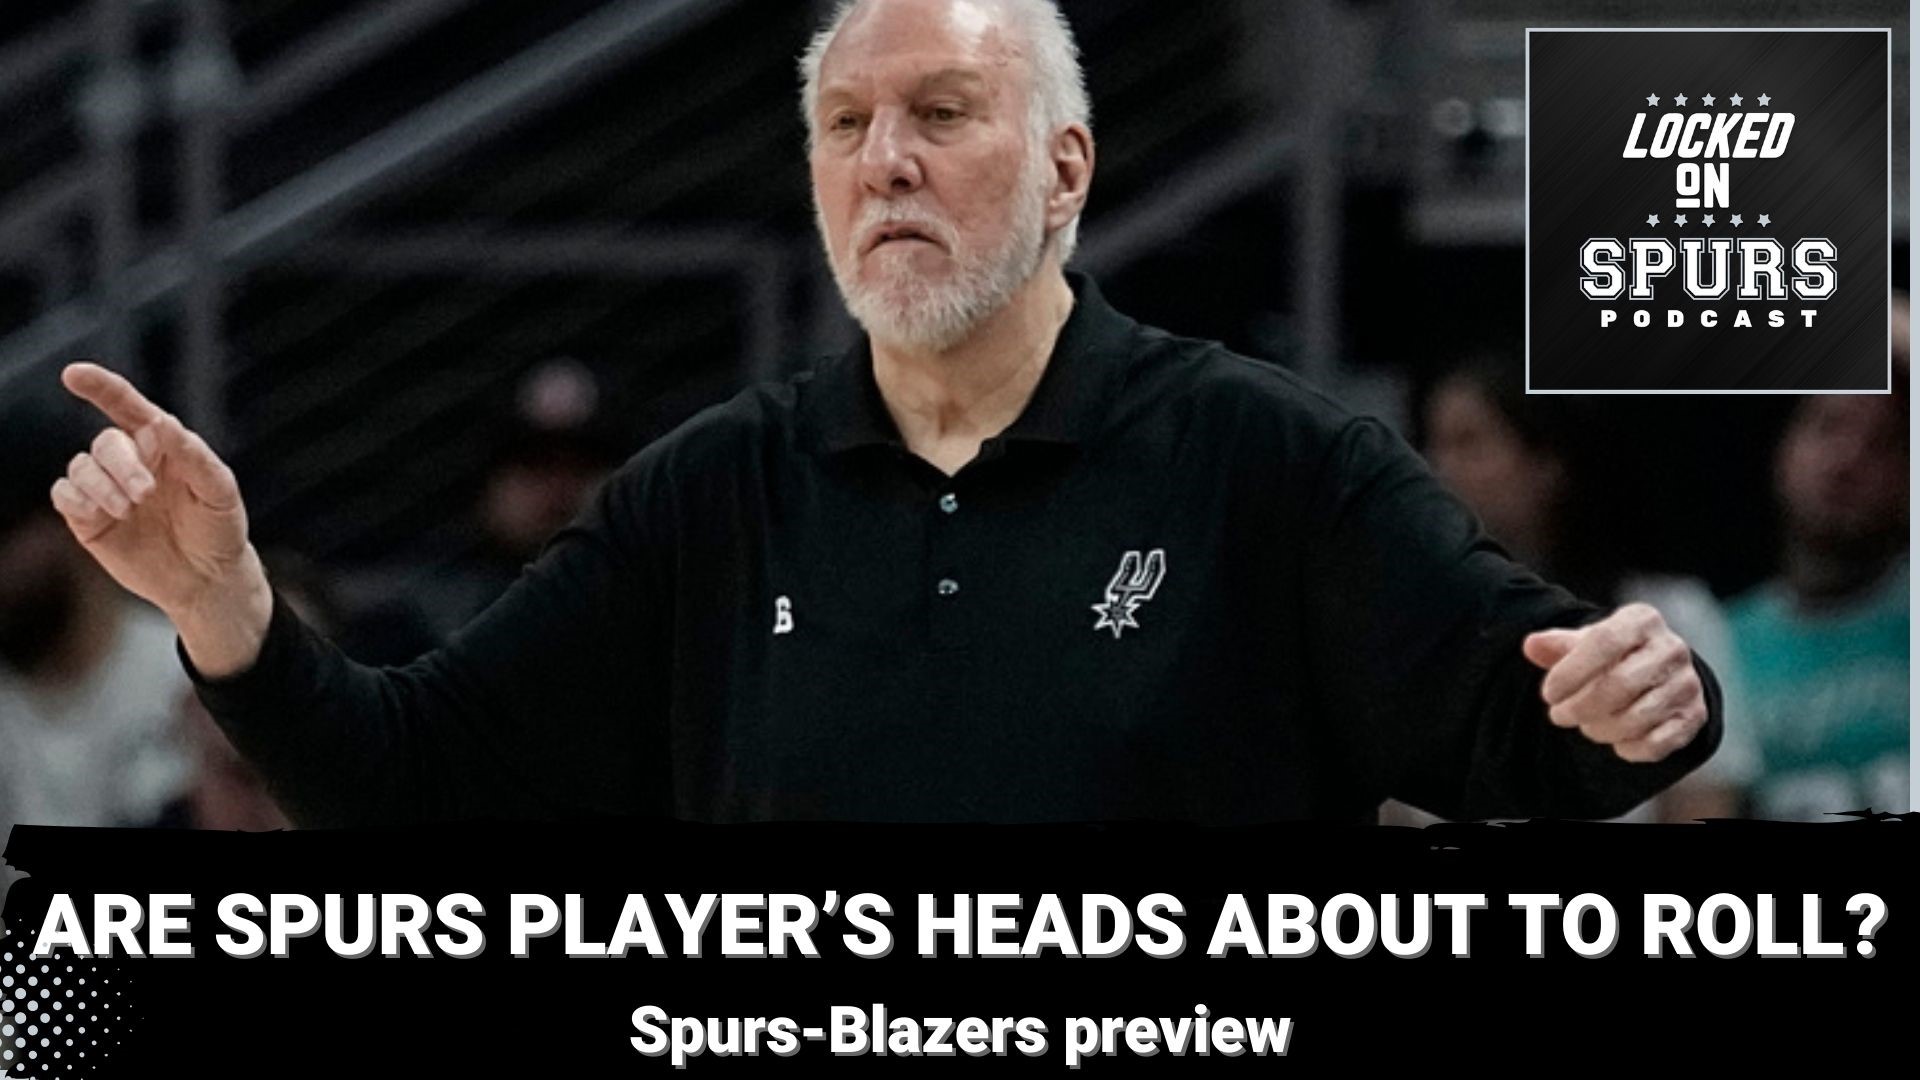 "Part of it is probably the need to demand from certain people time to have to be more consistent or I make changes," said Popovich.